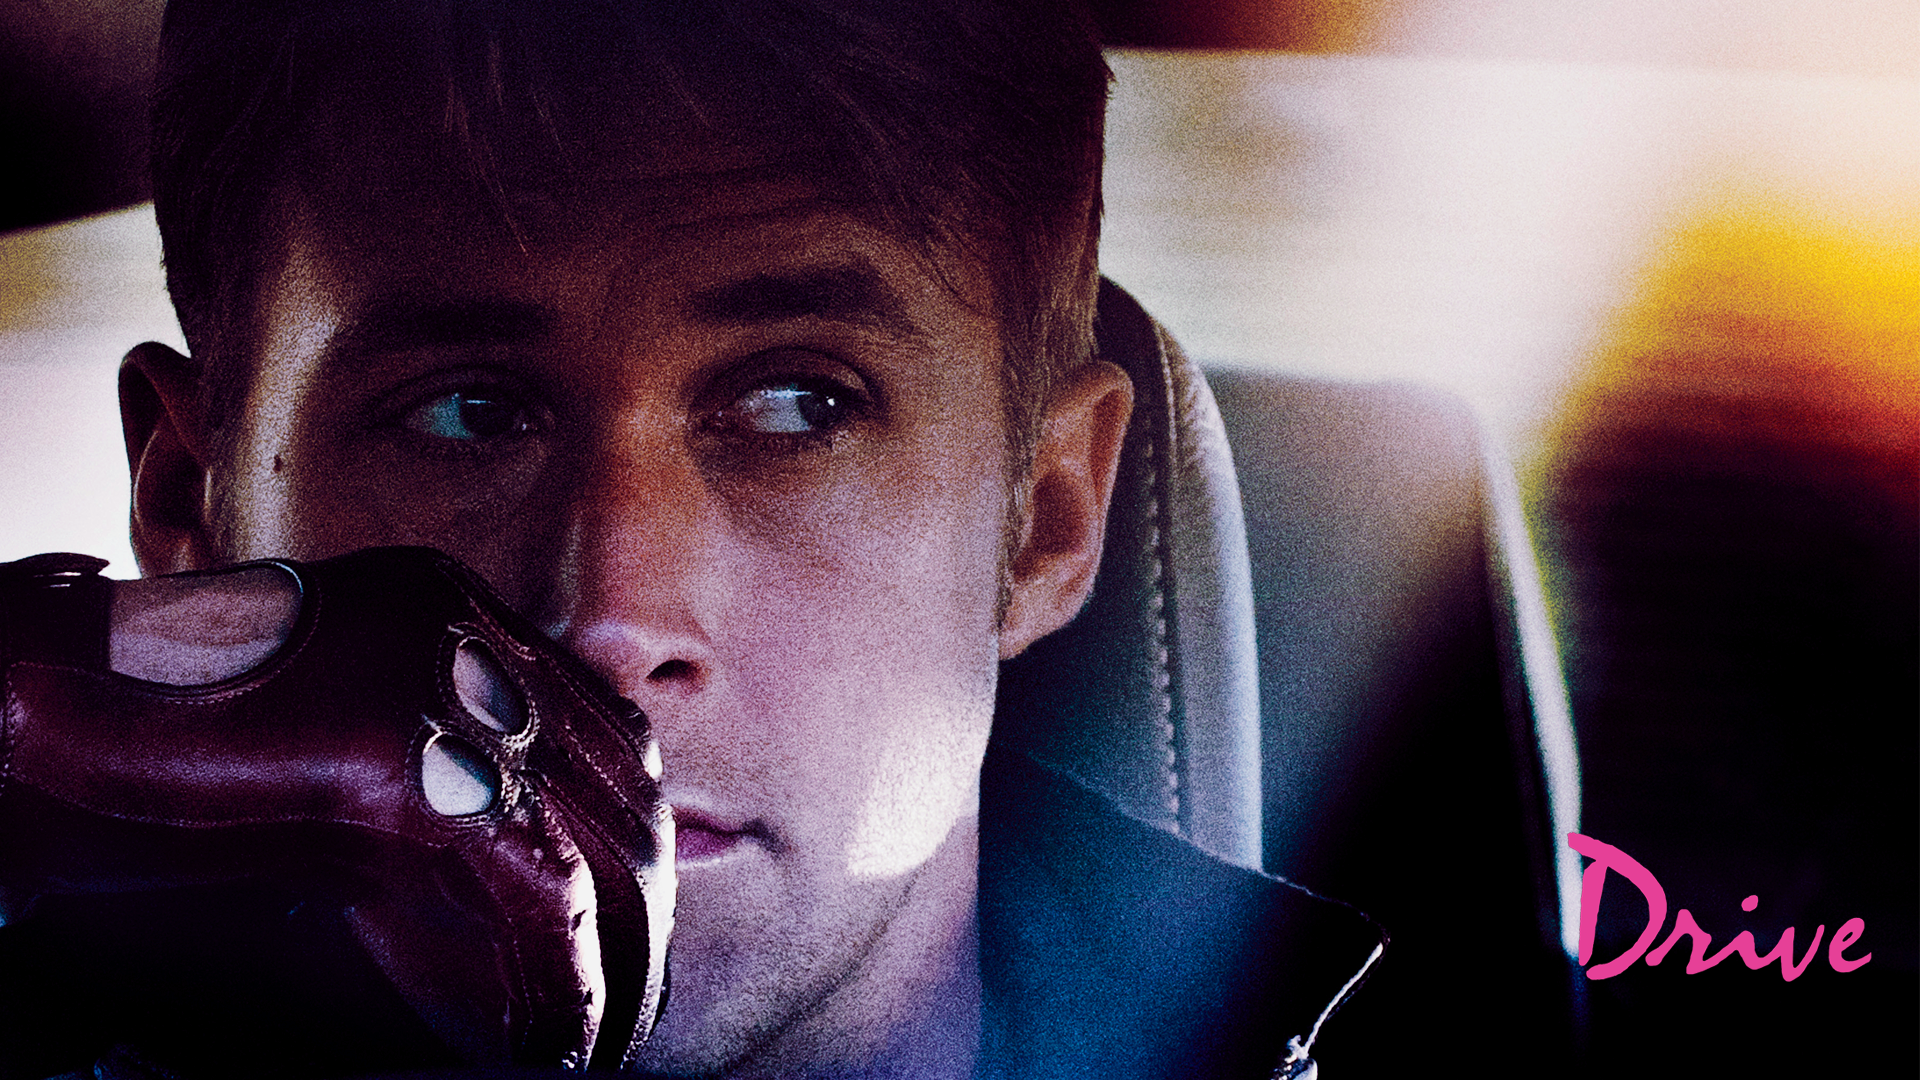 Movies Drive Wallpaper 1920x1080 Movies Drive Ryan Gosling Action